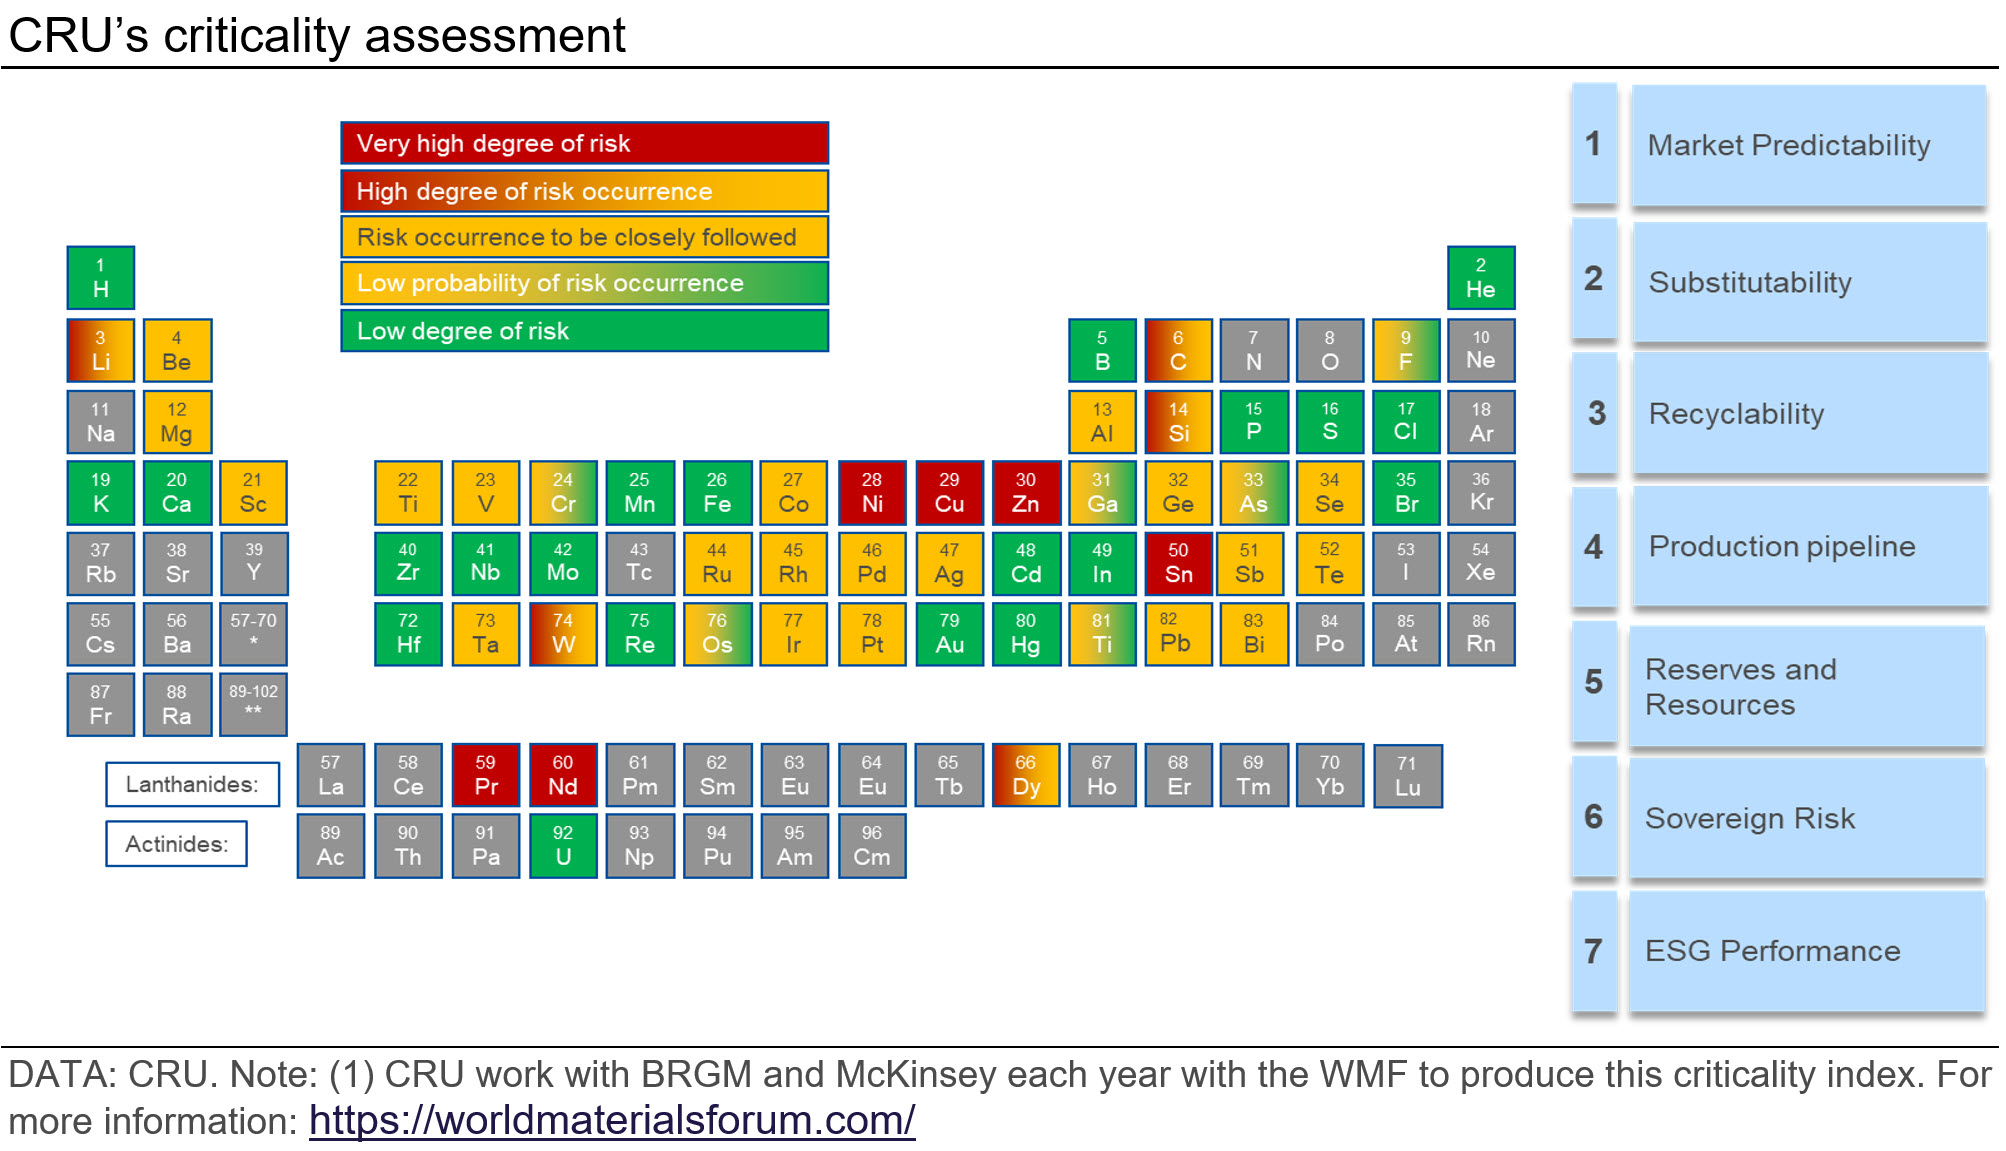 Table showing CRU’s criticality assessment